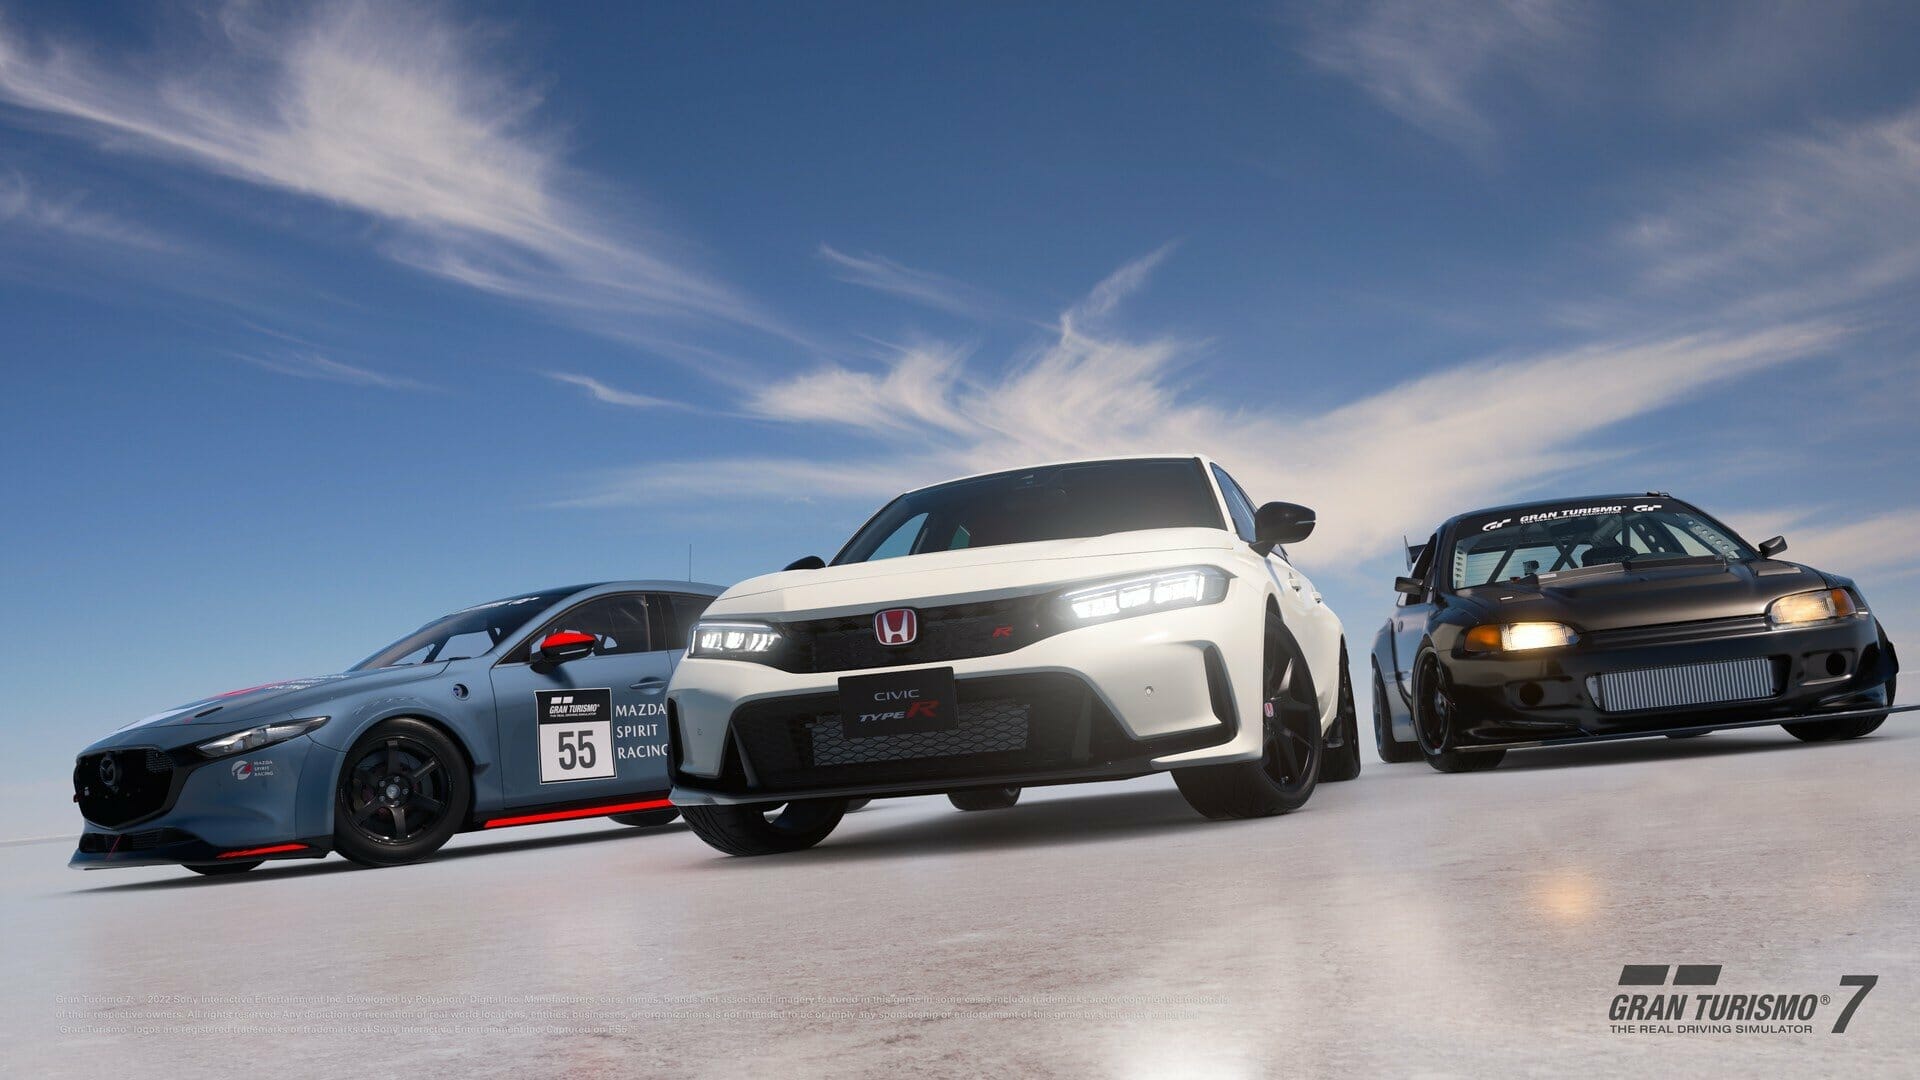 Gran Turismo 7 Update 1.38 Now Available, Adding Three New